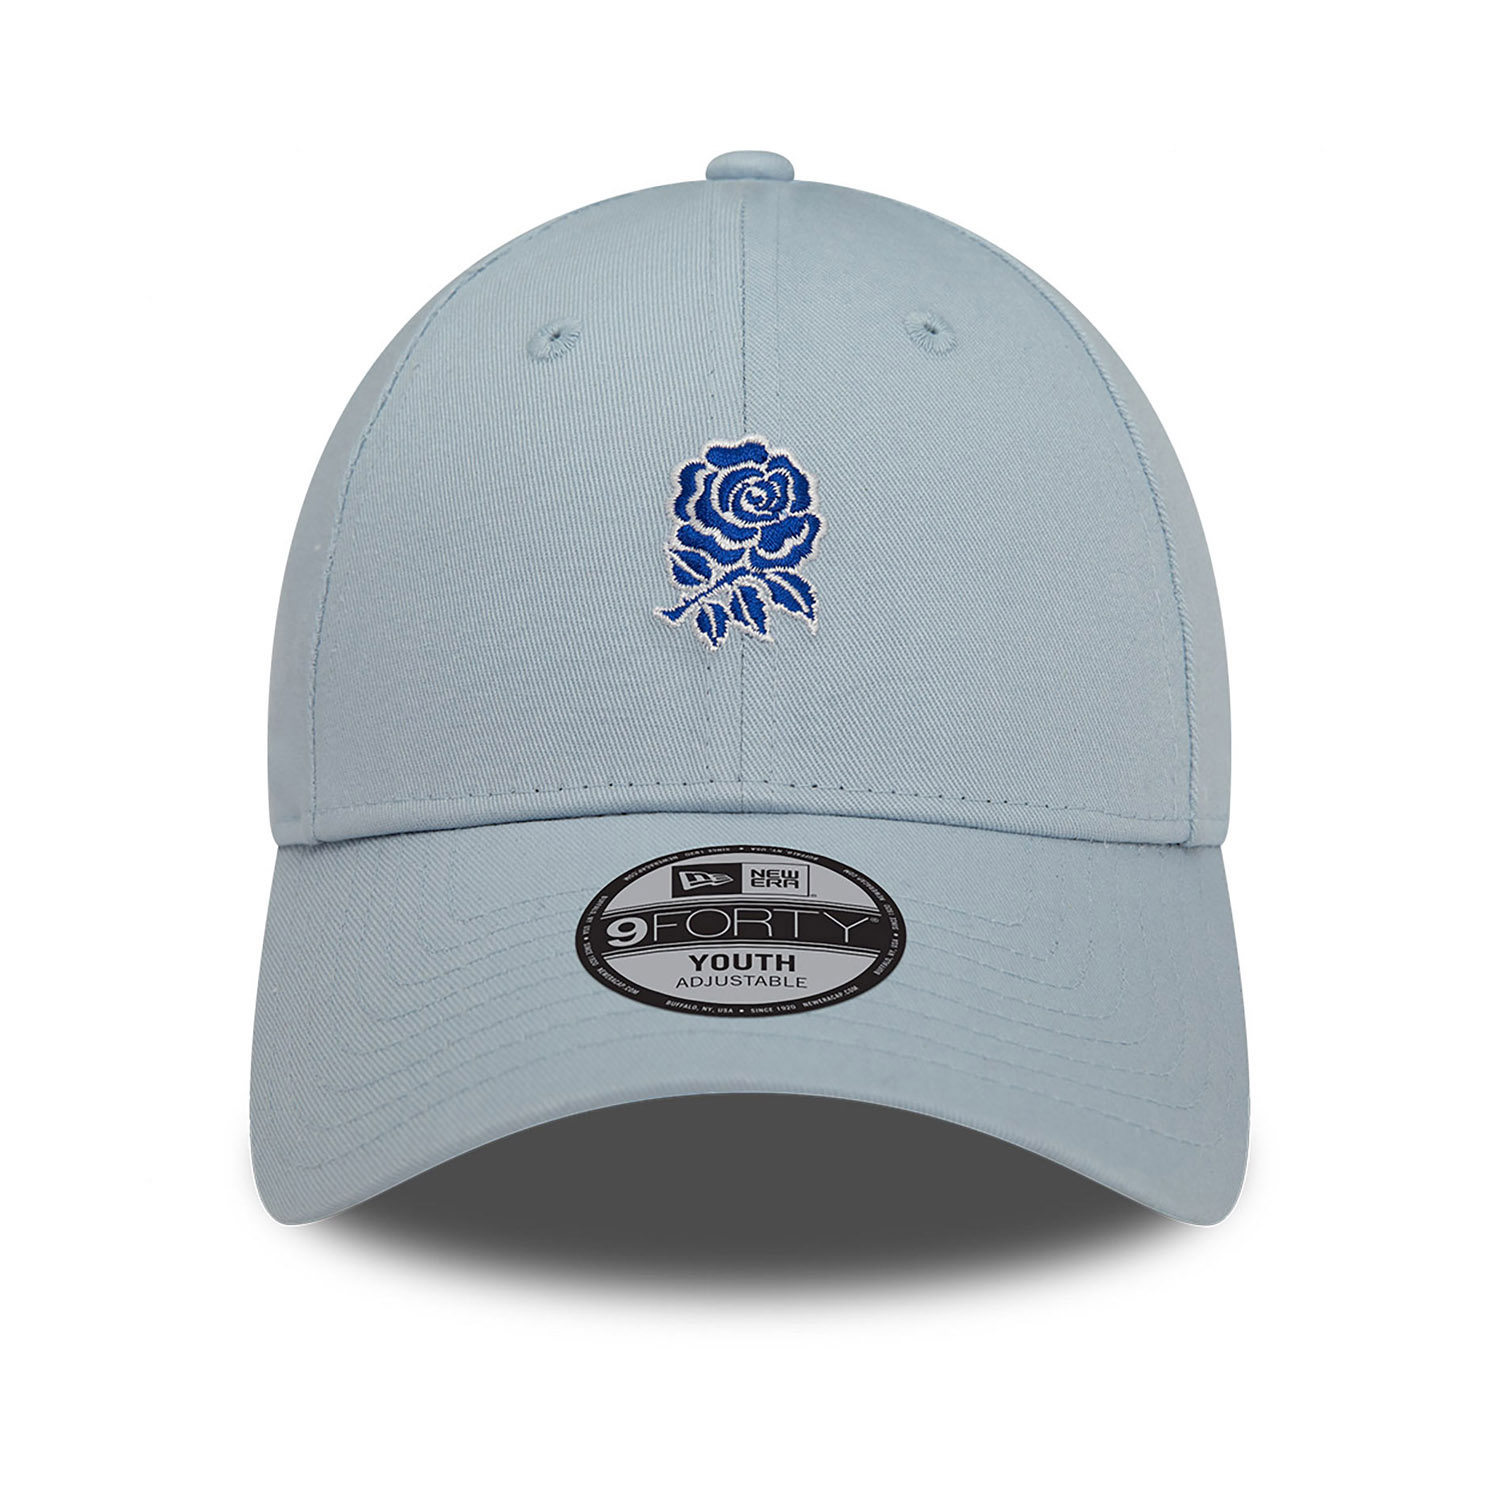 Rugby Football Union Youth Seasonal Blue 9FORTY Adjustable Cap